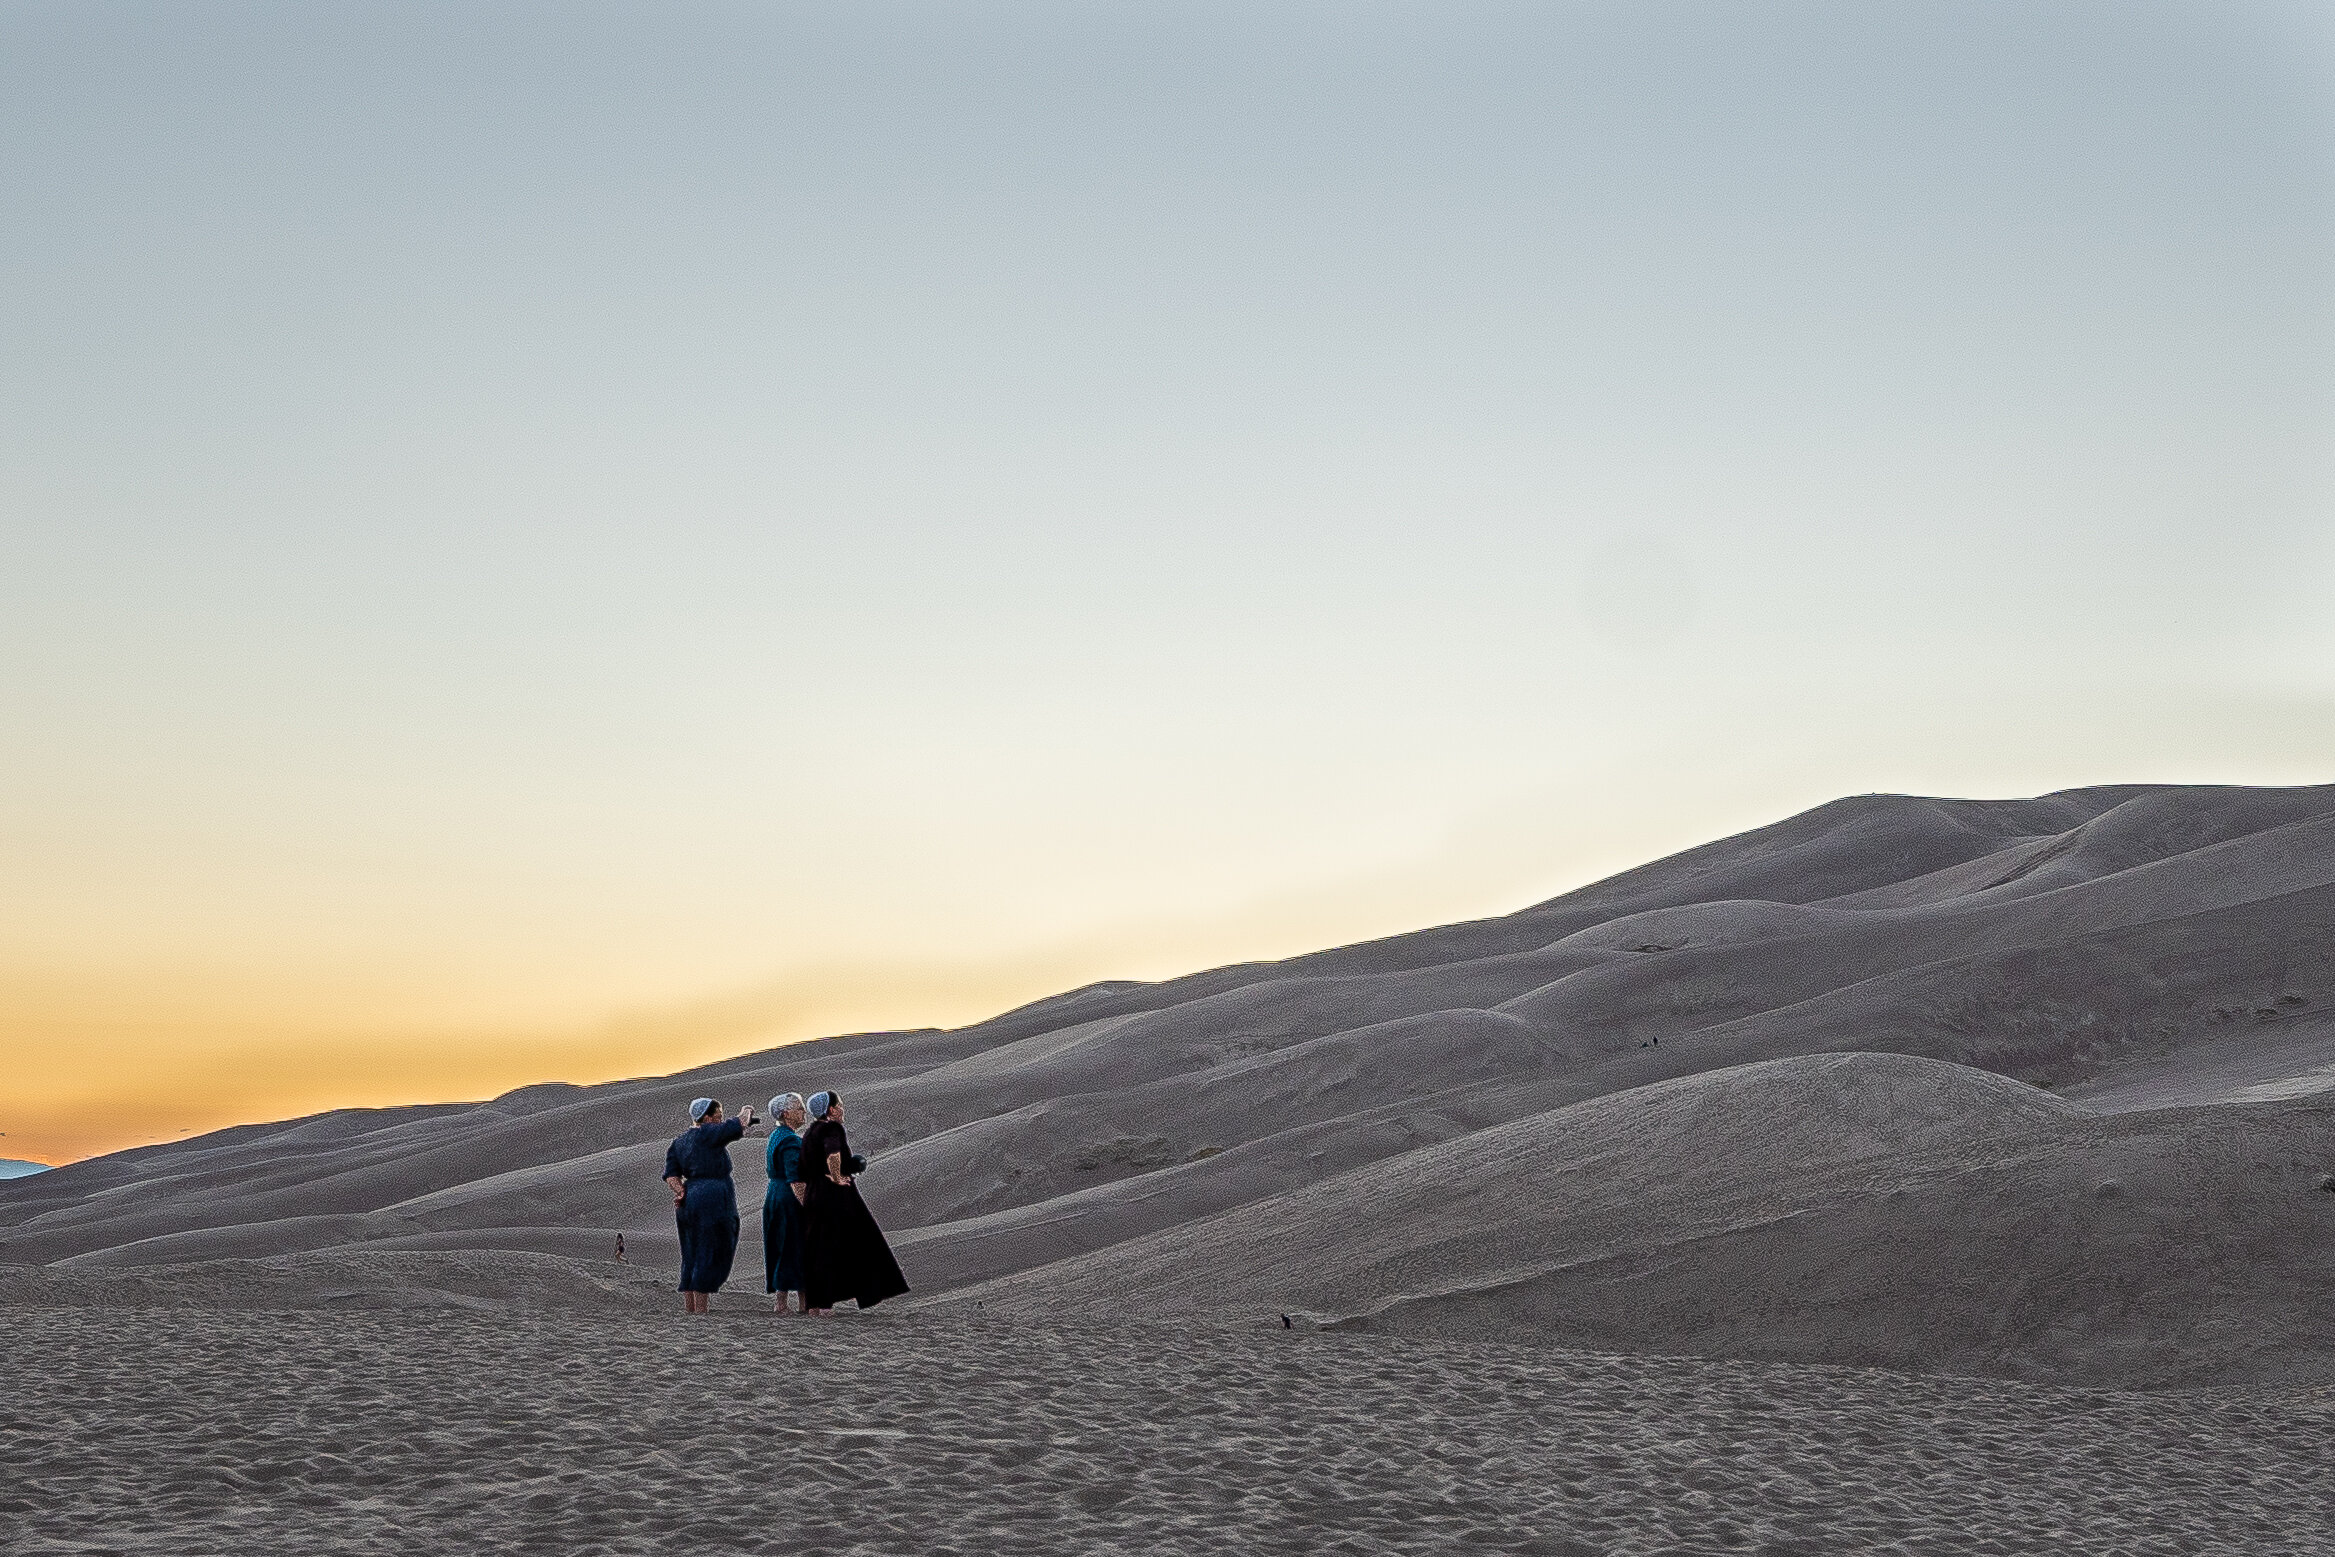  Craig spotted these Mennonite women enjoying the dunes and took a photo opportunity for what has become one of my most favorite pictures.  